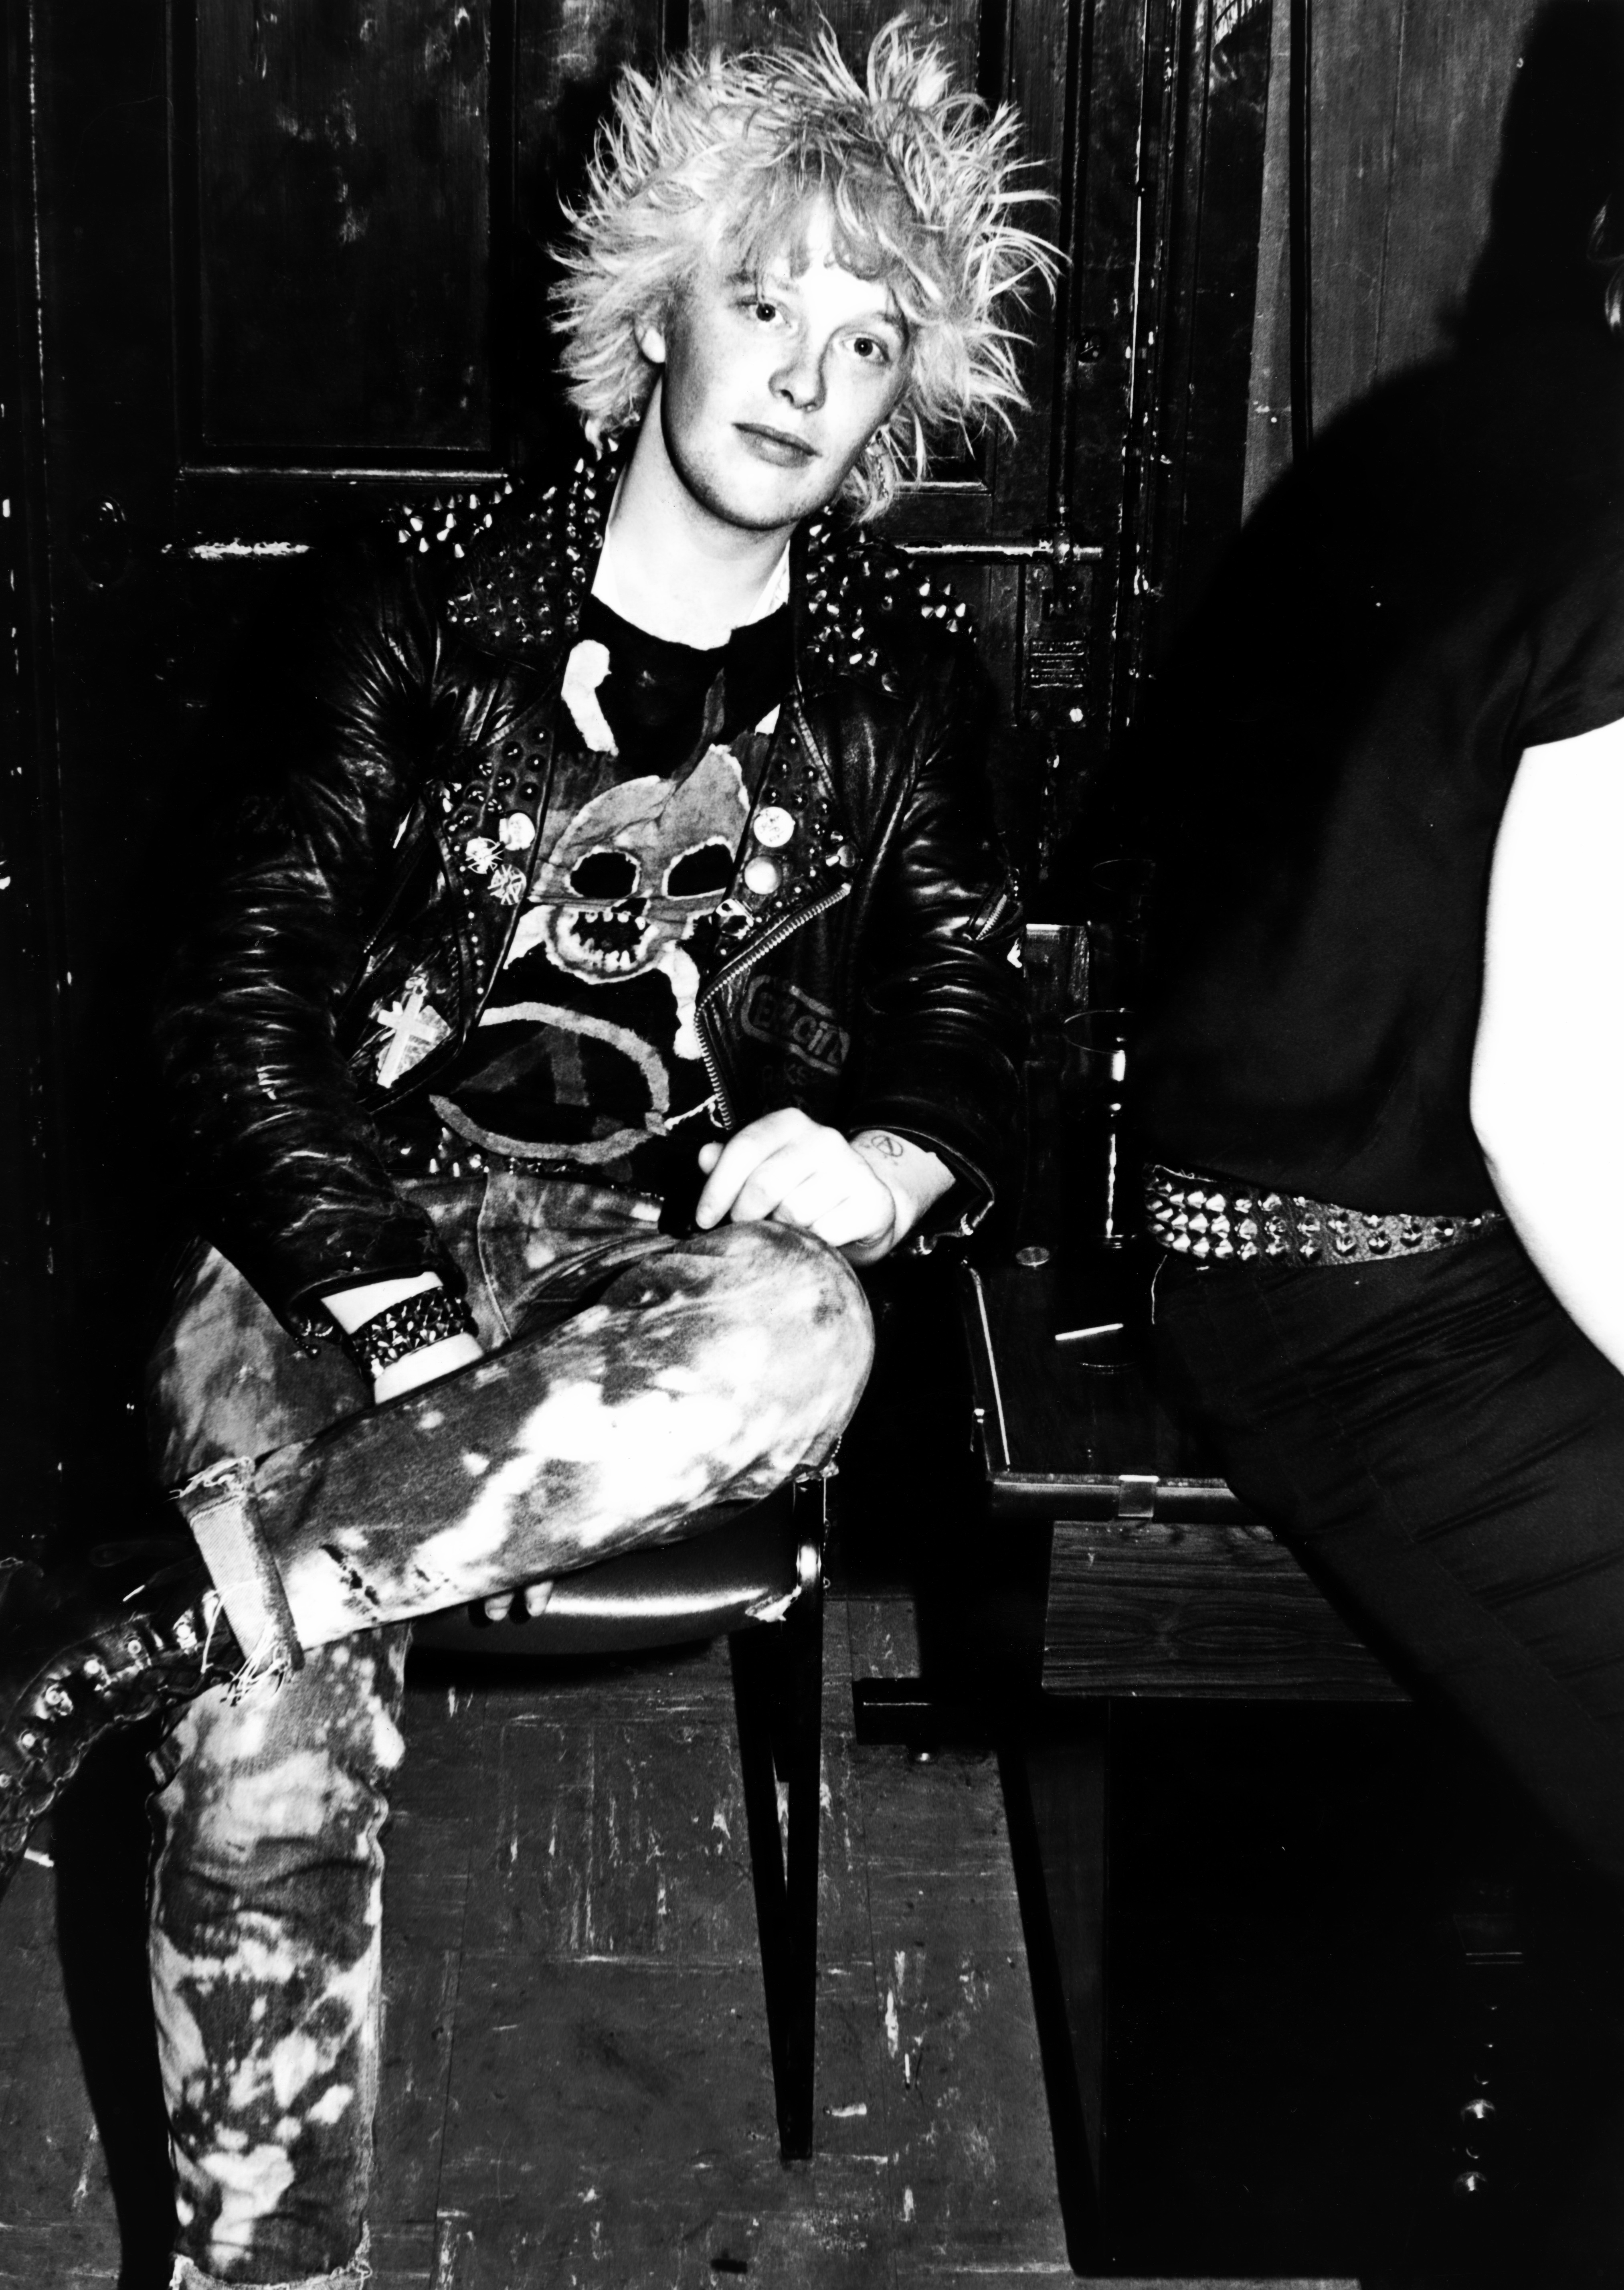 Punk in the East | Billy, Uk Decay, Gala, 1982.